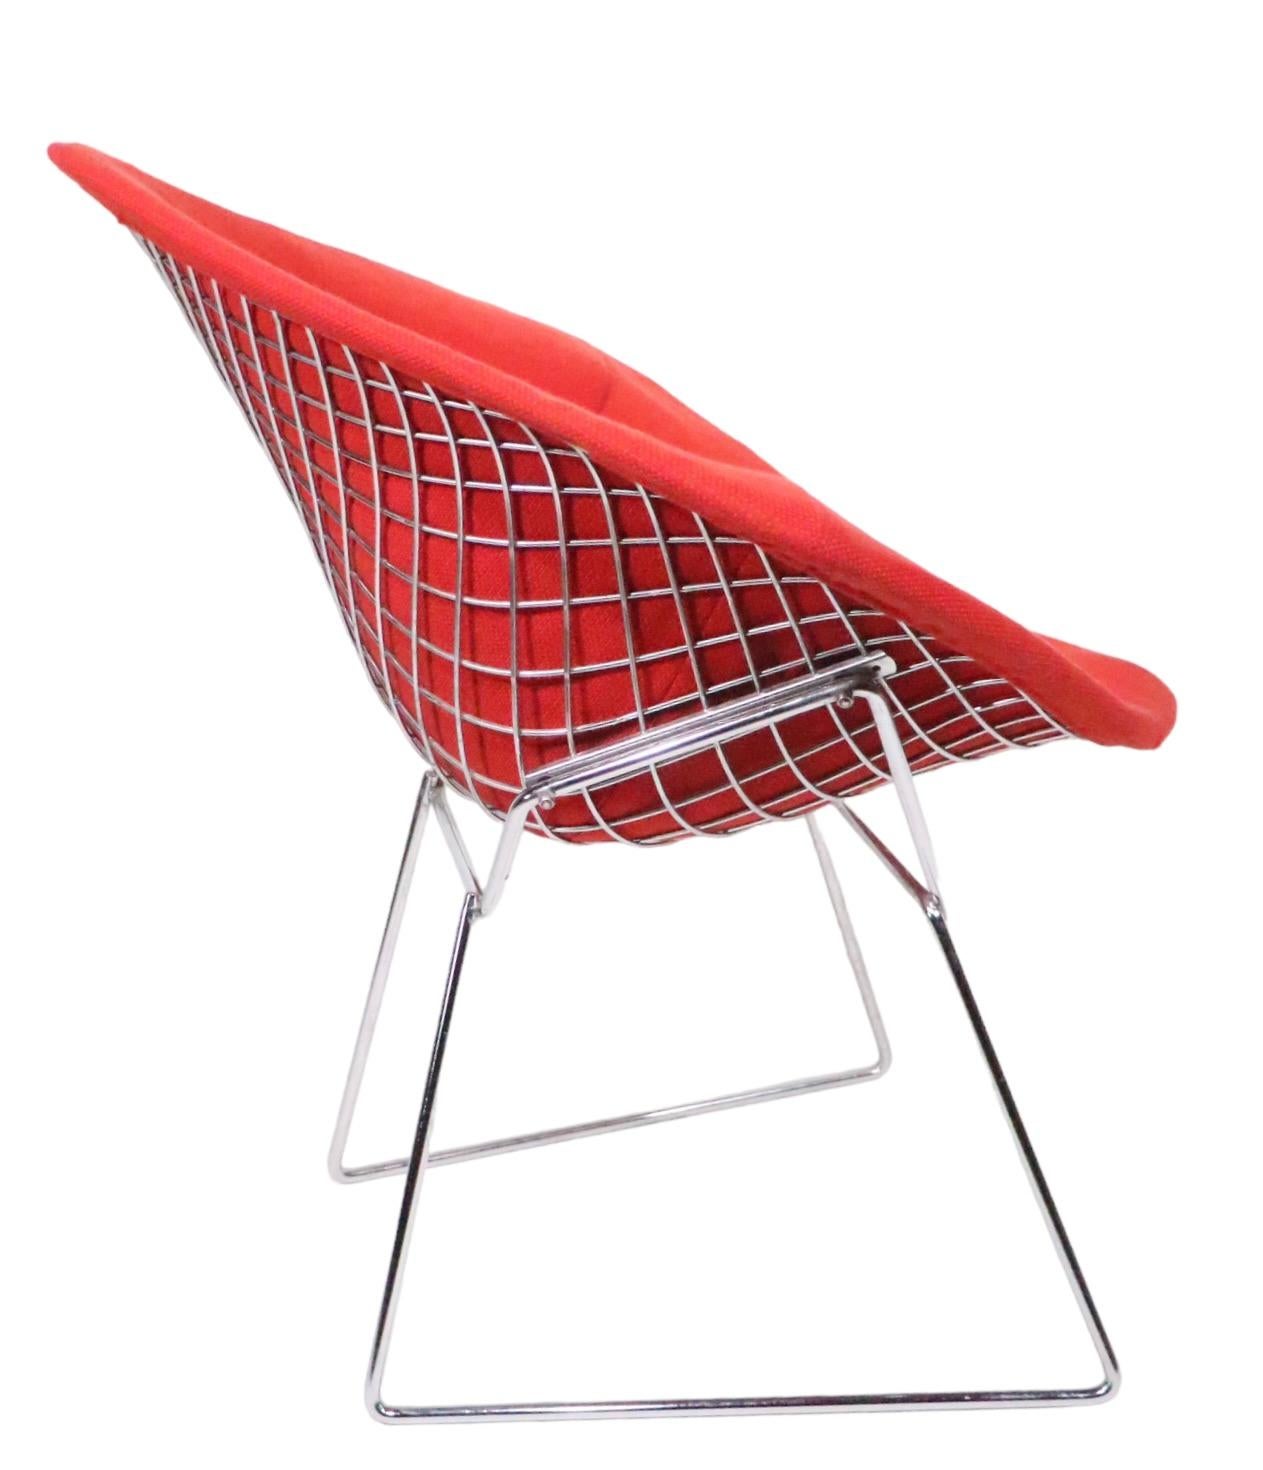 Bertoia for Knoll Chrome Diamond Chair with Full Pad Cover C 1960/1970s In Good Condition For Sale In New York, NY